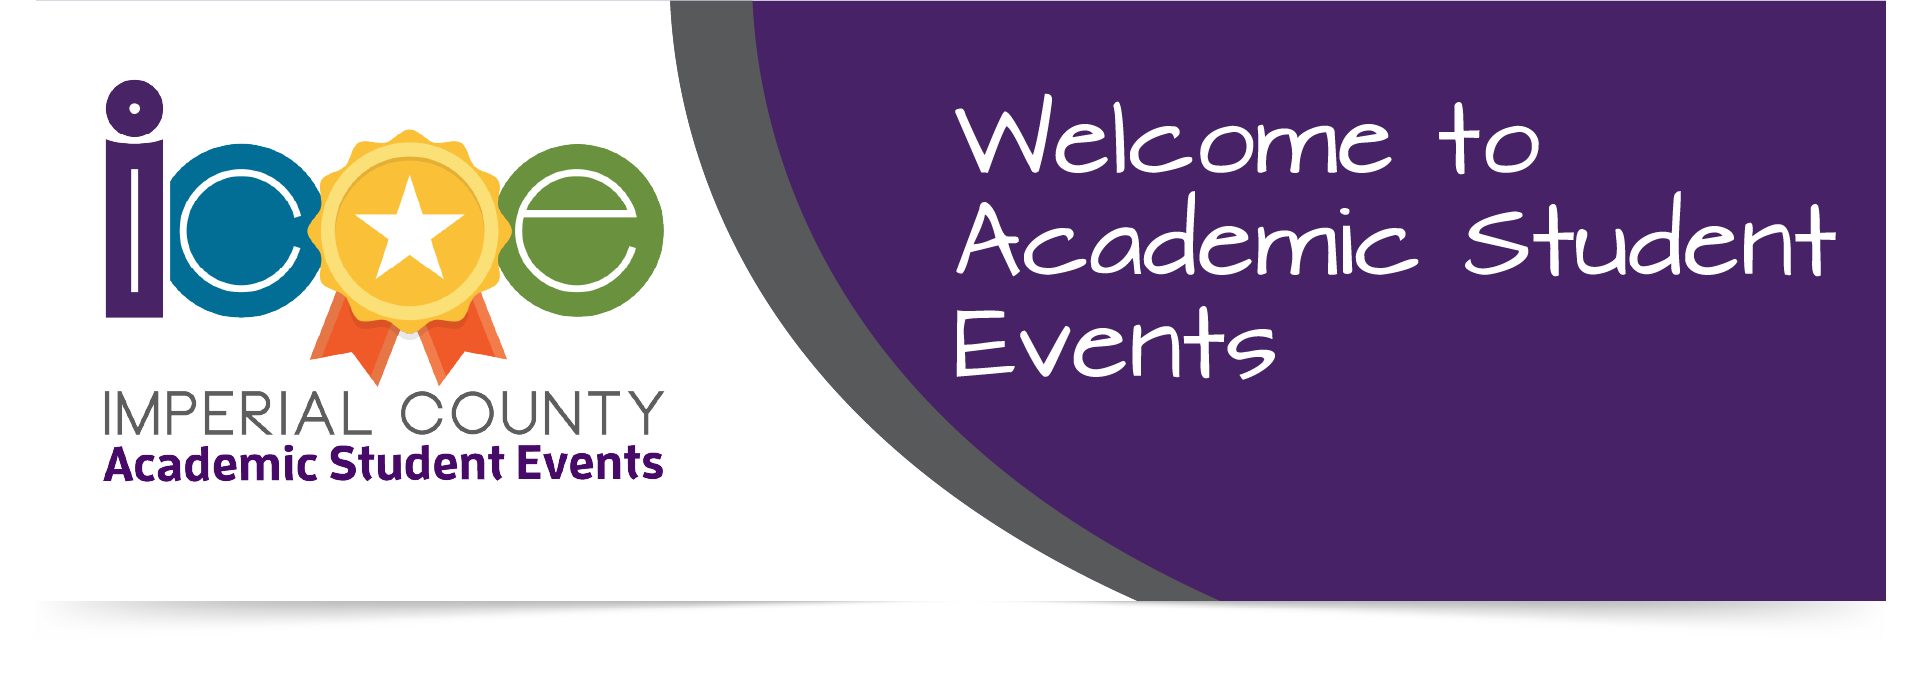 Welcome to Academic Student Events Banner